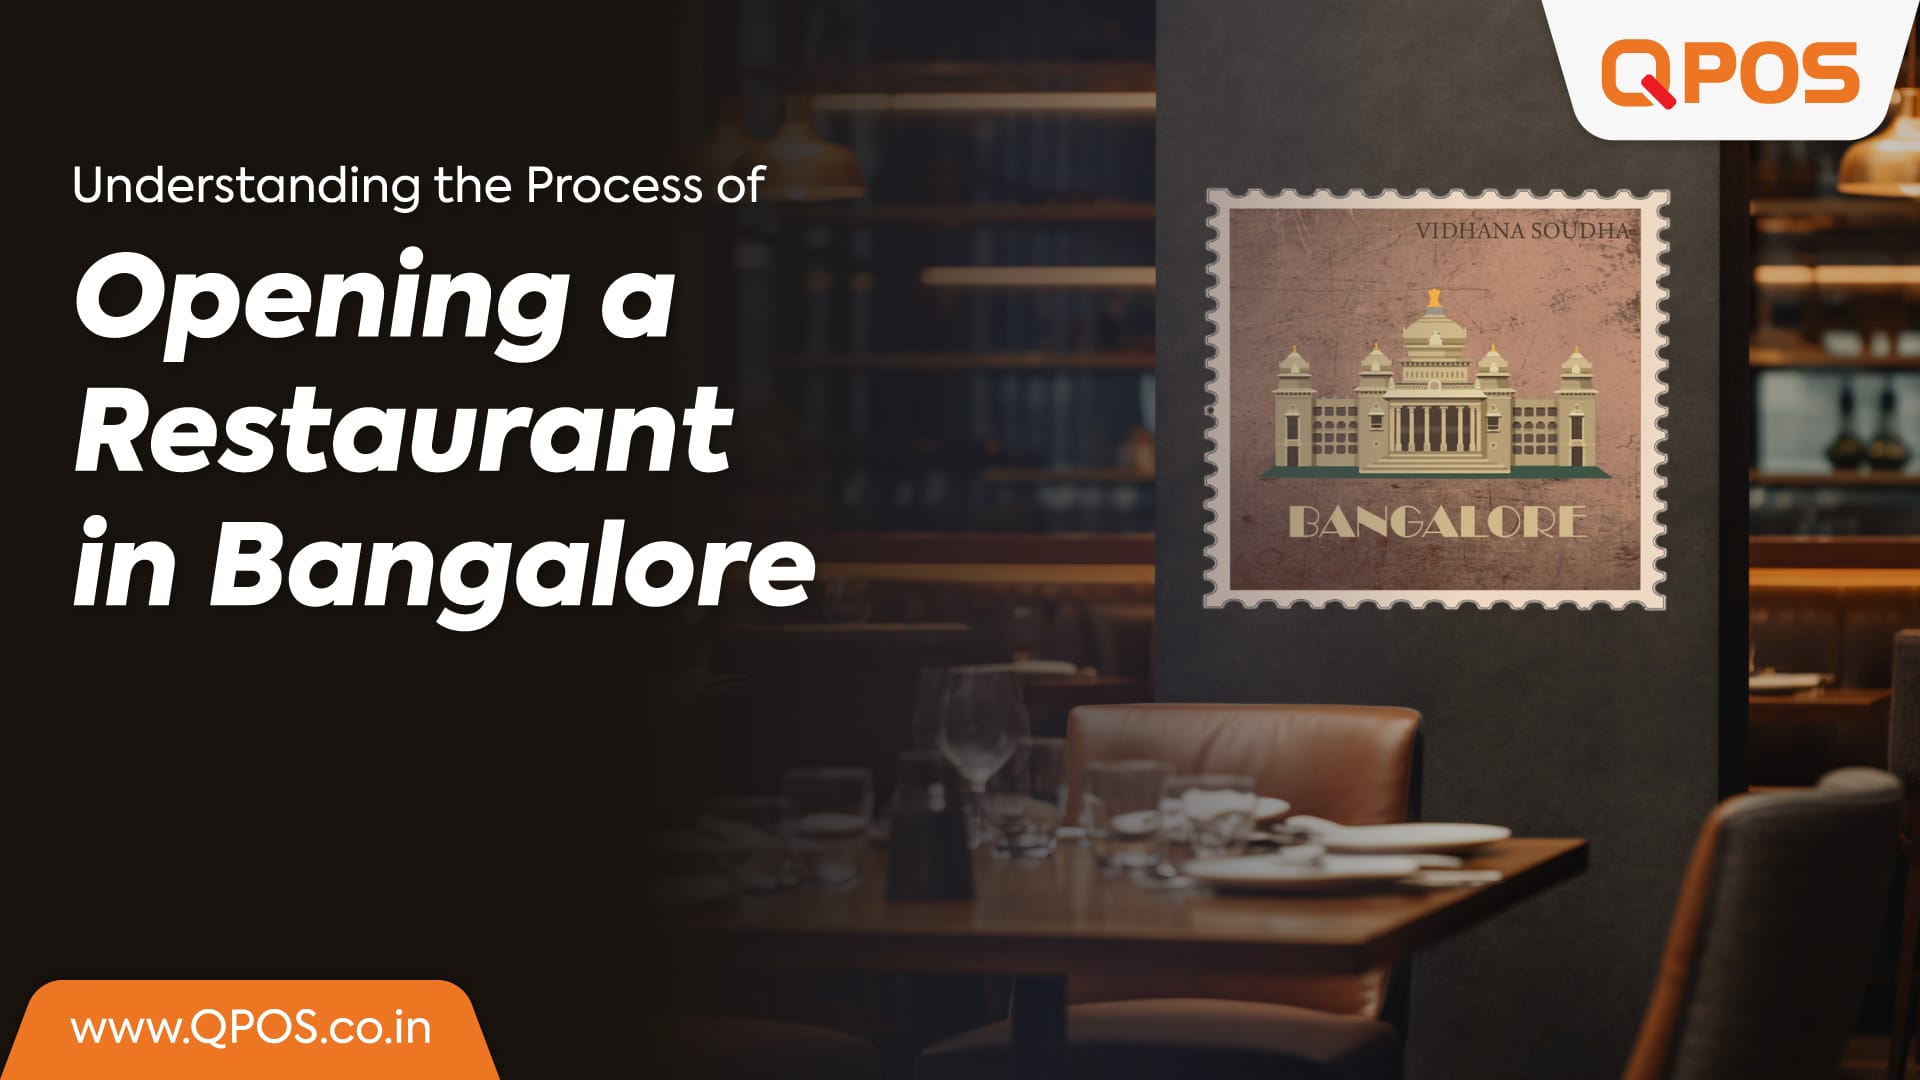 Understanding the Process of Opening a Restaurant in Bangalore